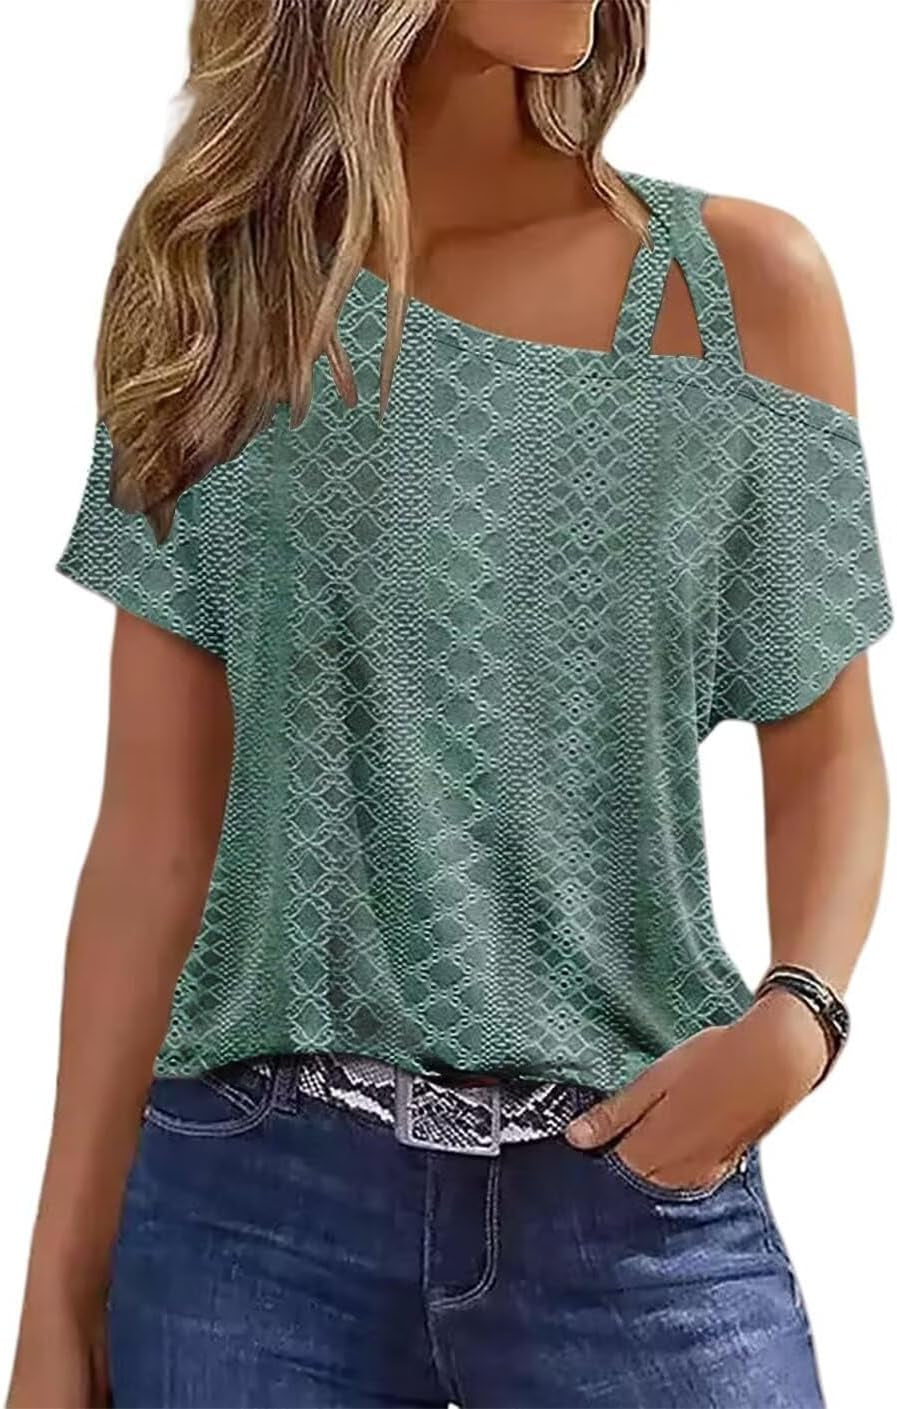 Criss-Cross One Shoulder Tops Sexy Cold Shoulder Shirts Summer Short Sleeve T-Shirts Vacation Loose Casual Tees